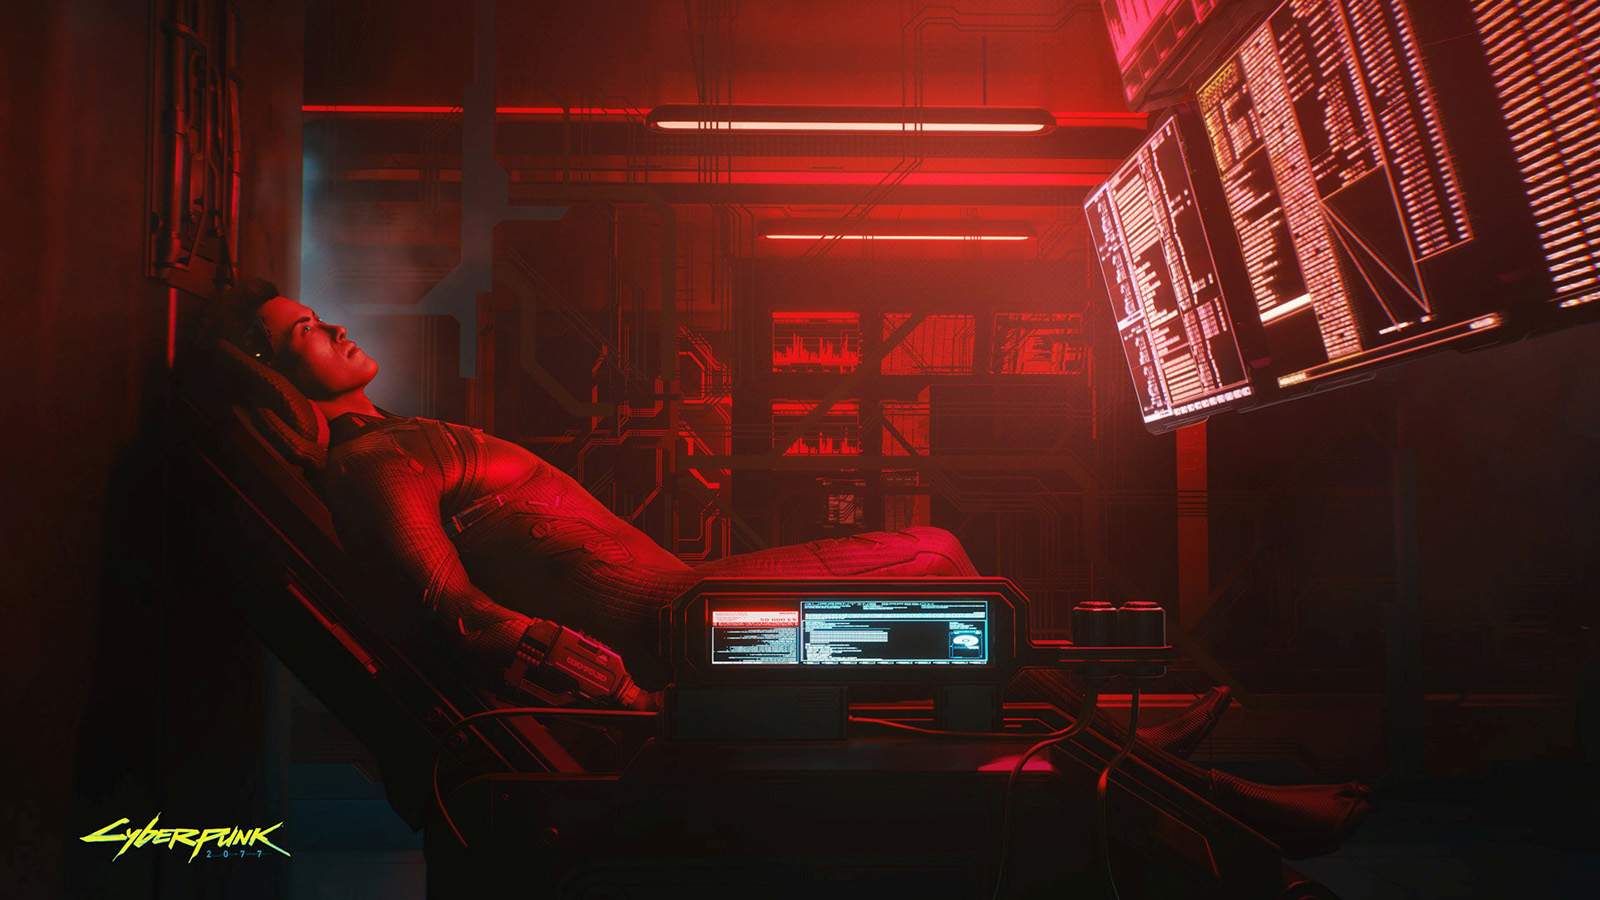 The game 'Cyberpunk 2077' is easily one of the most anticipated titles of 2020, but not without controversy. Go behind the biggest issues with the game.